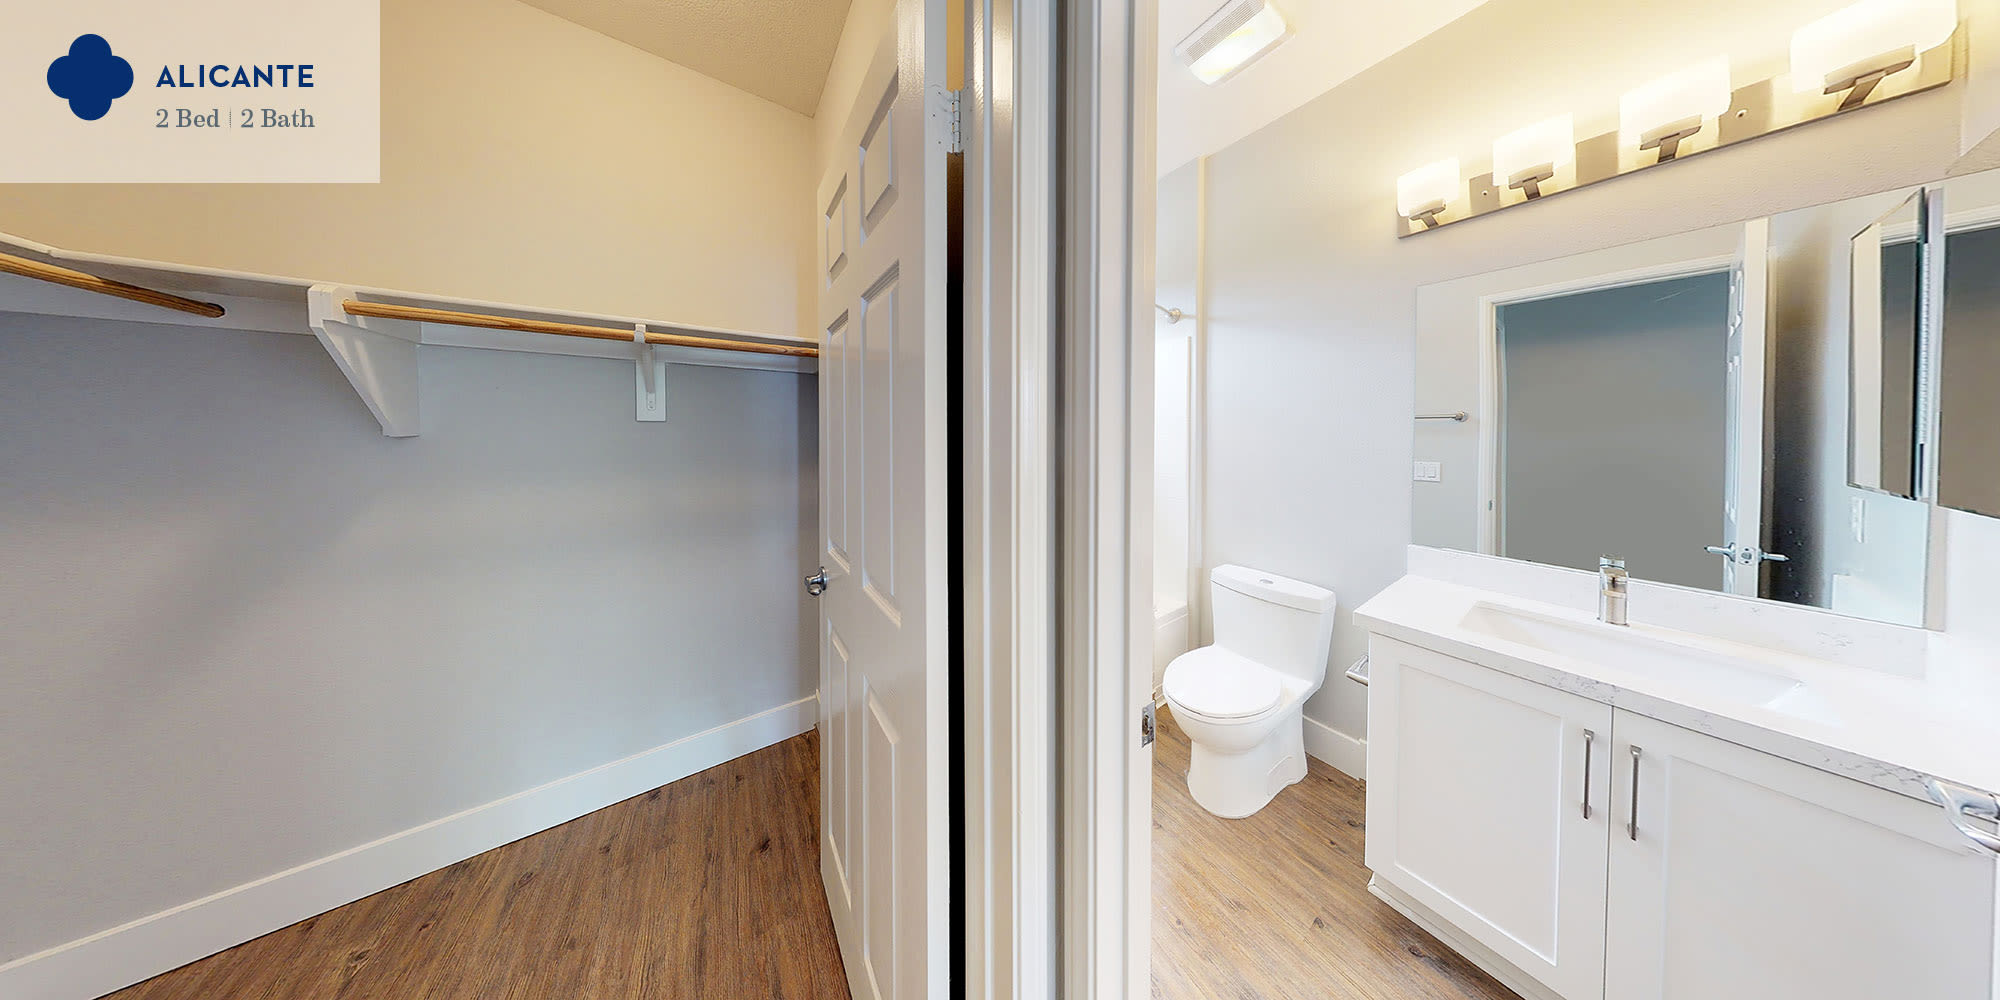 Bathroom and spacious walk-in closet in a two-bedroom apartment home at Mission Hills in Camarillo, California